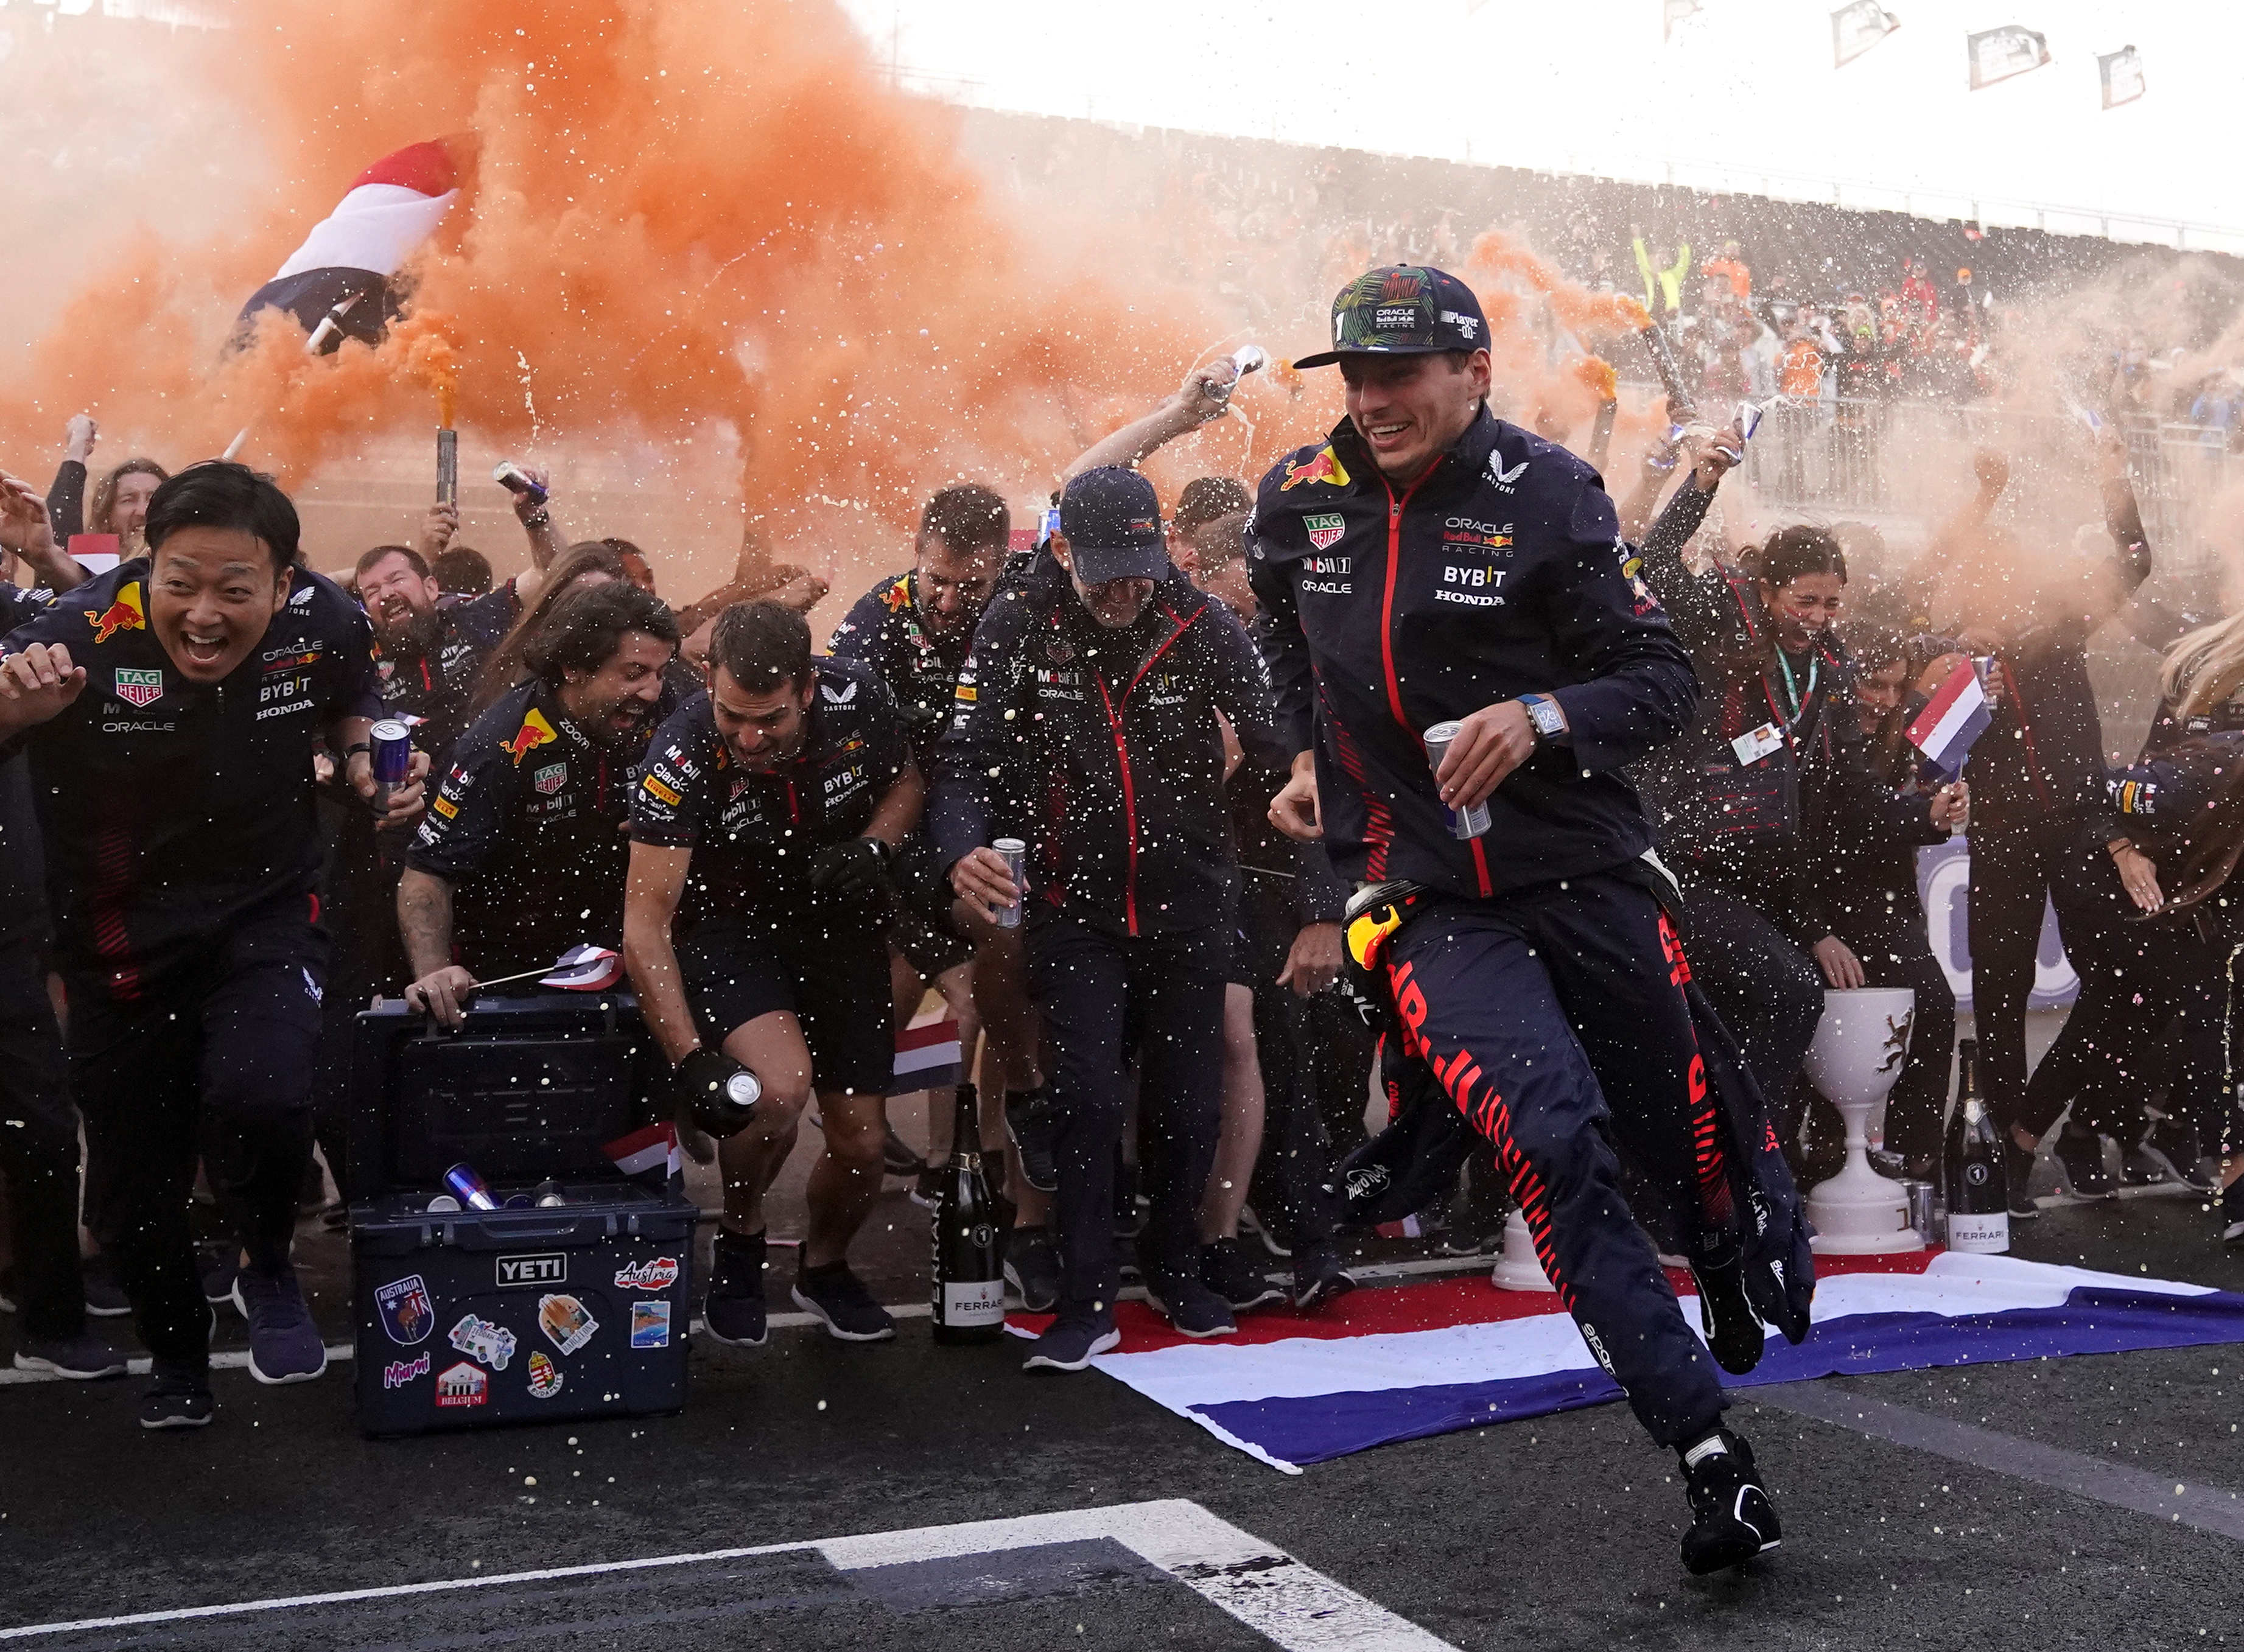 Victories have become commonplace for Verstappen